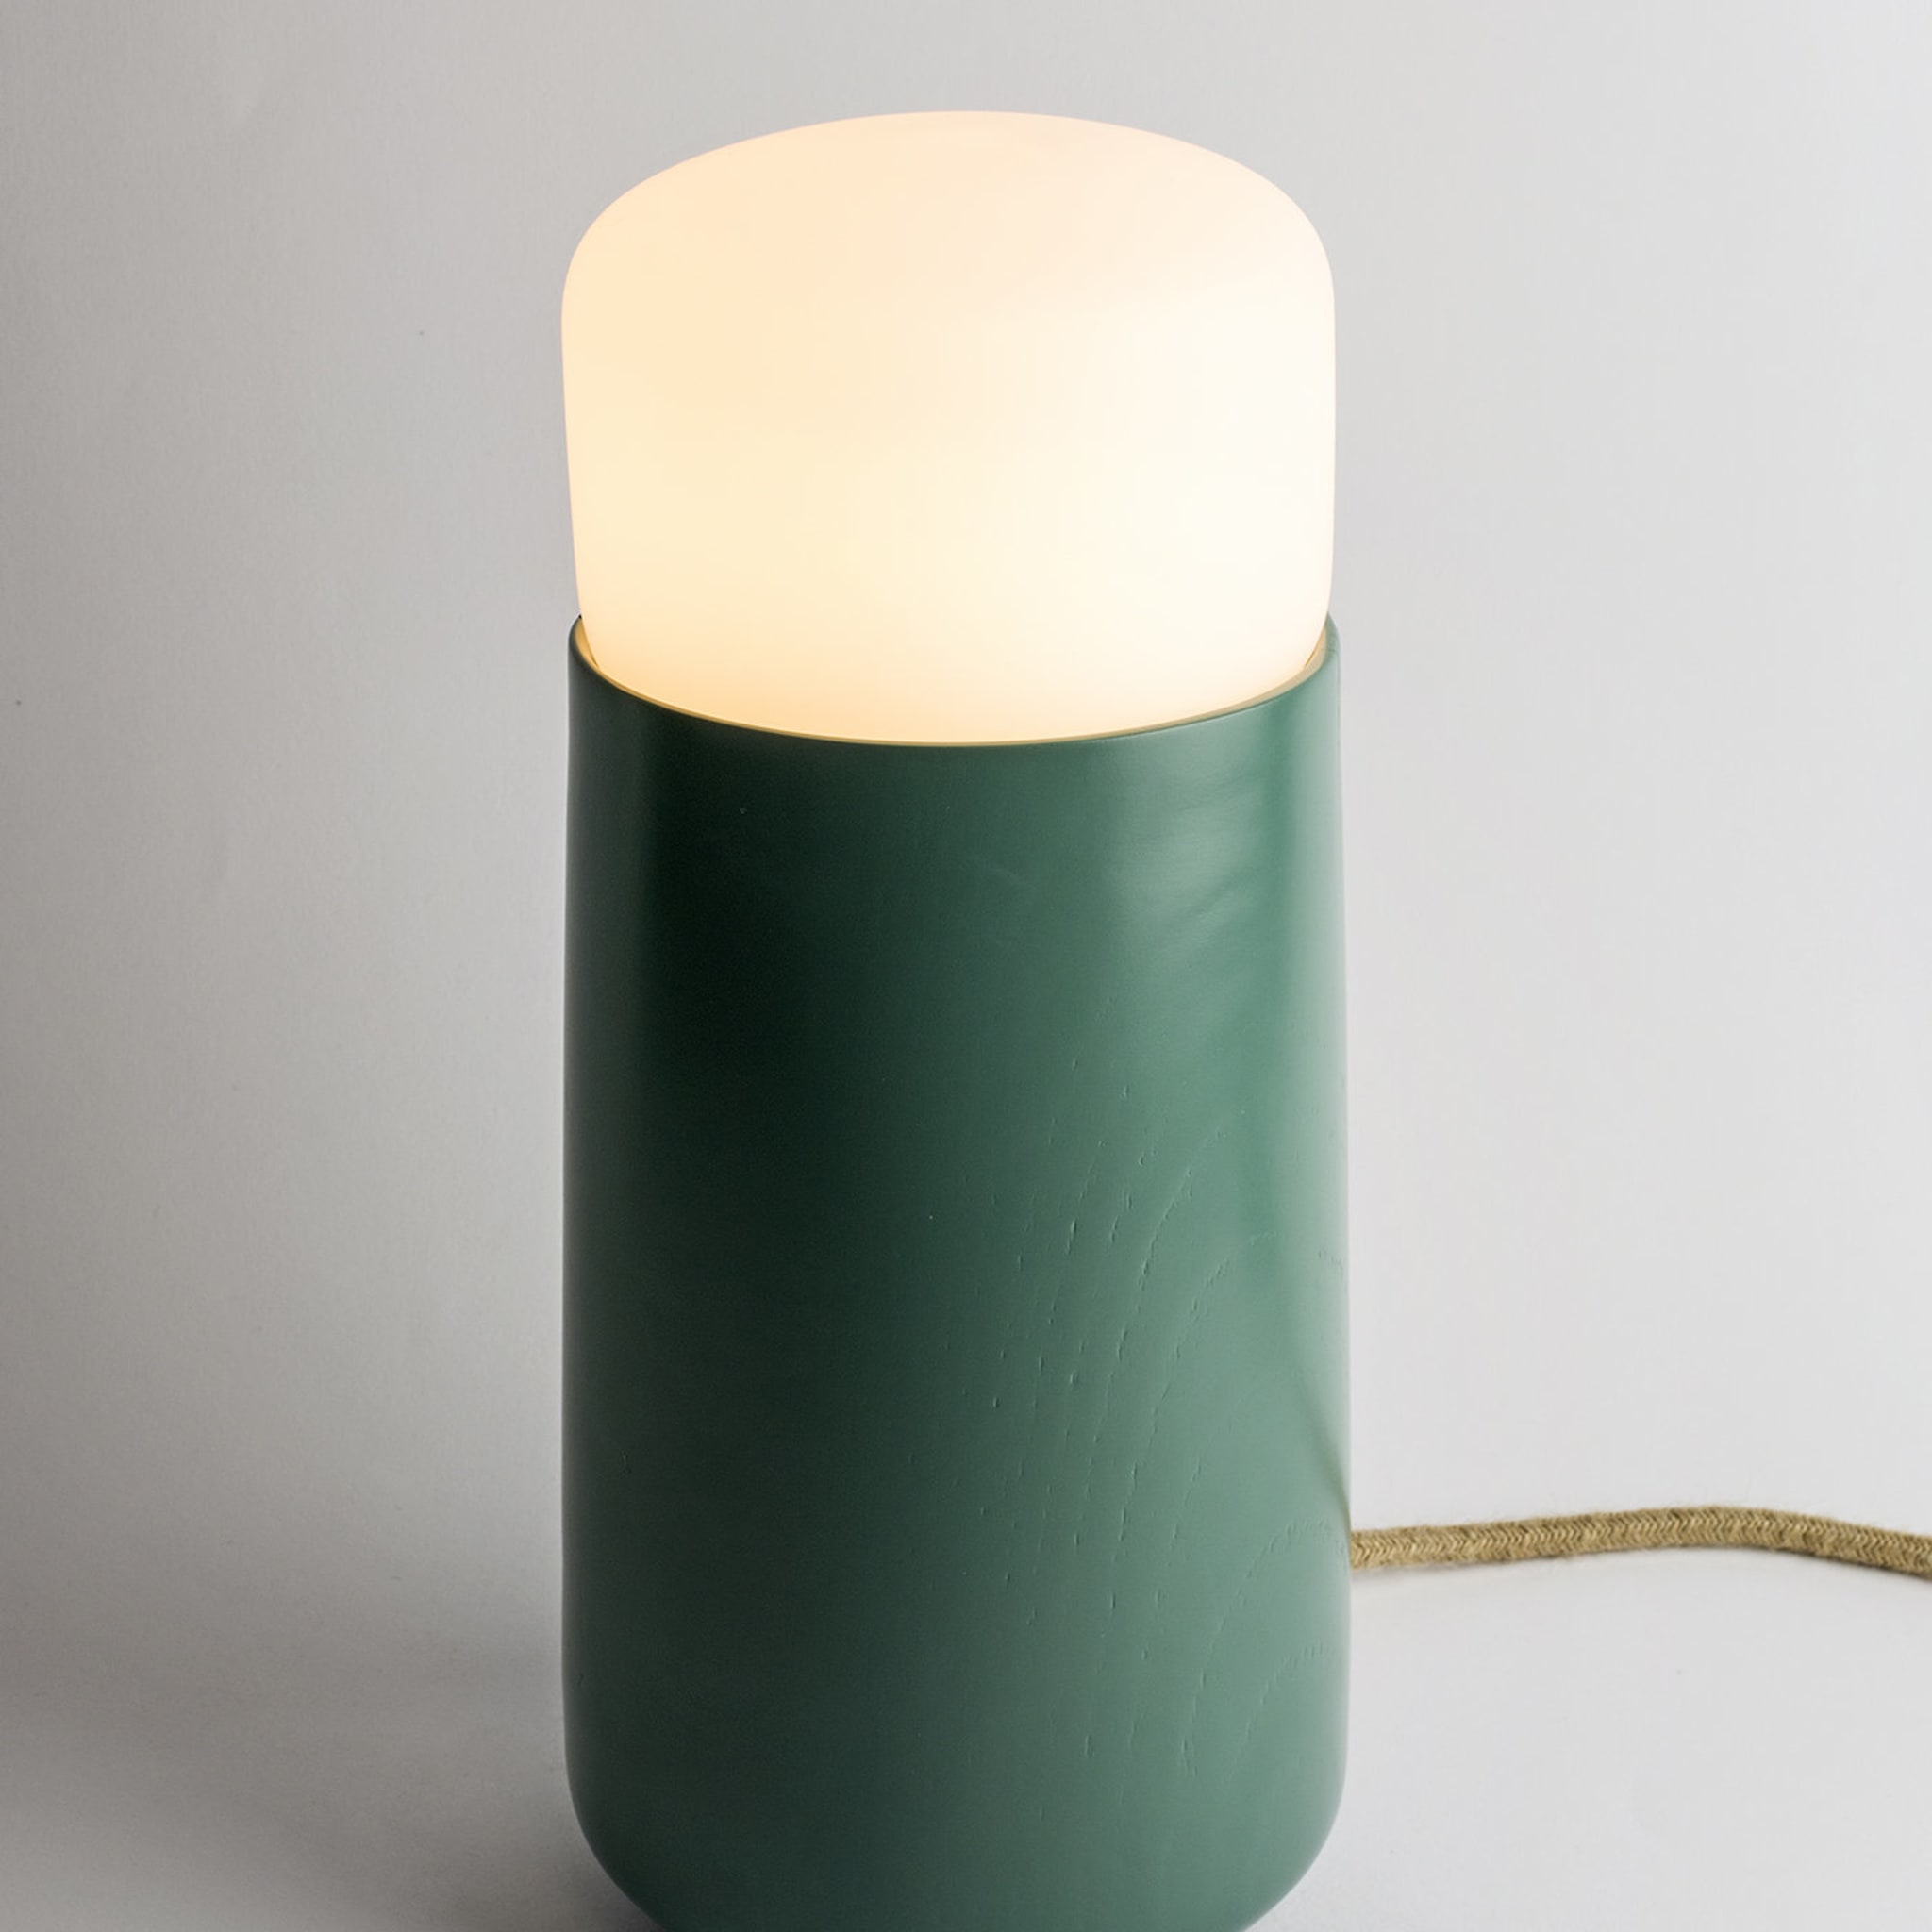 Silo Large Green Table Lamp by Alalda Design - Alternative view 1